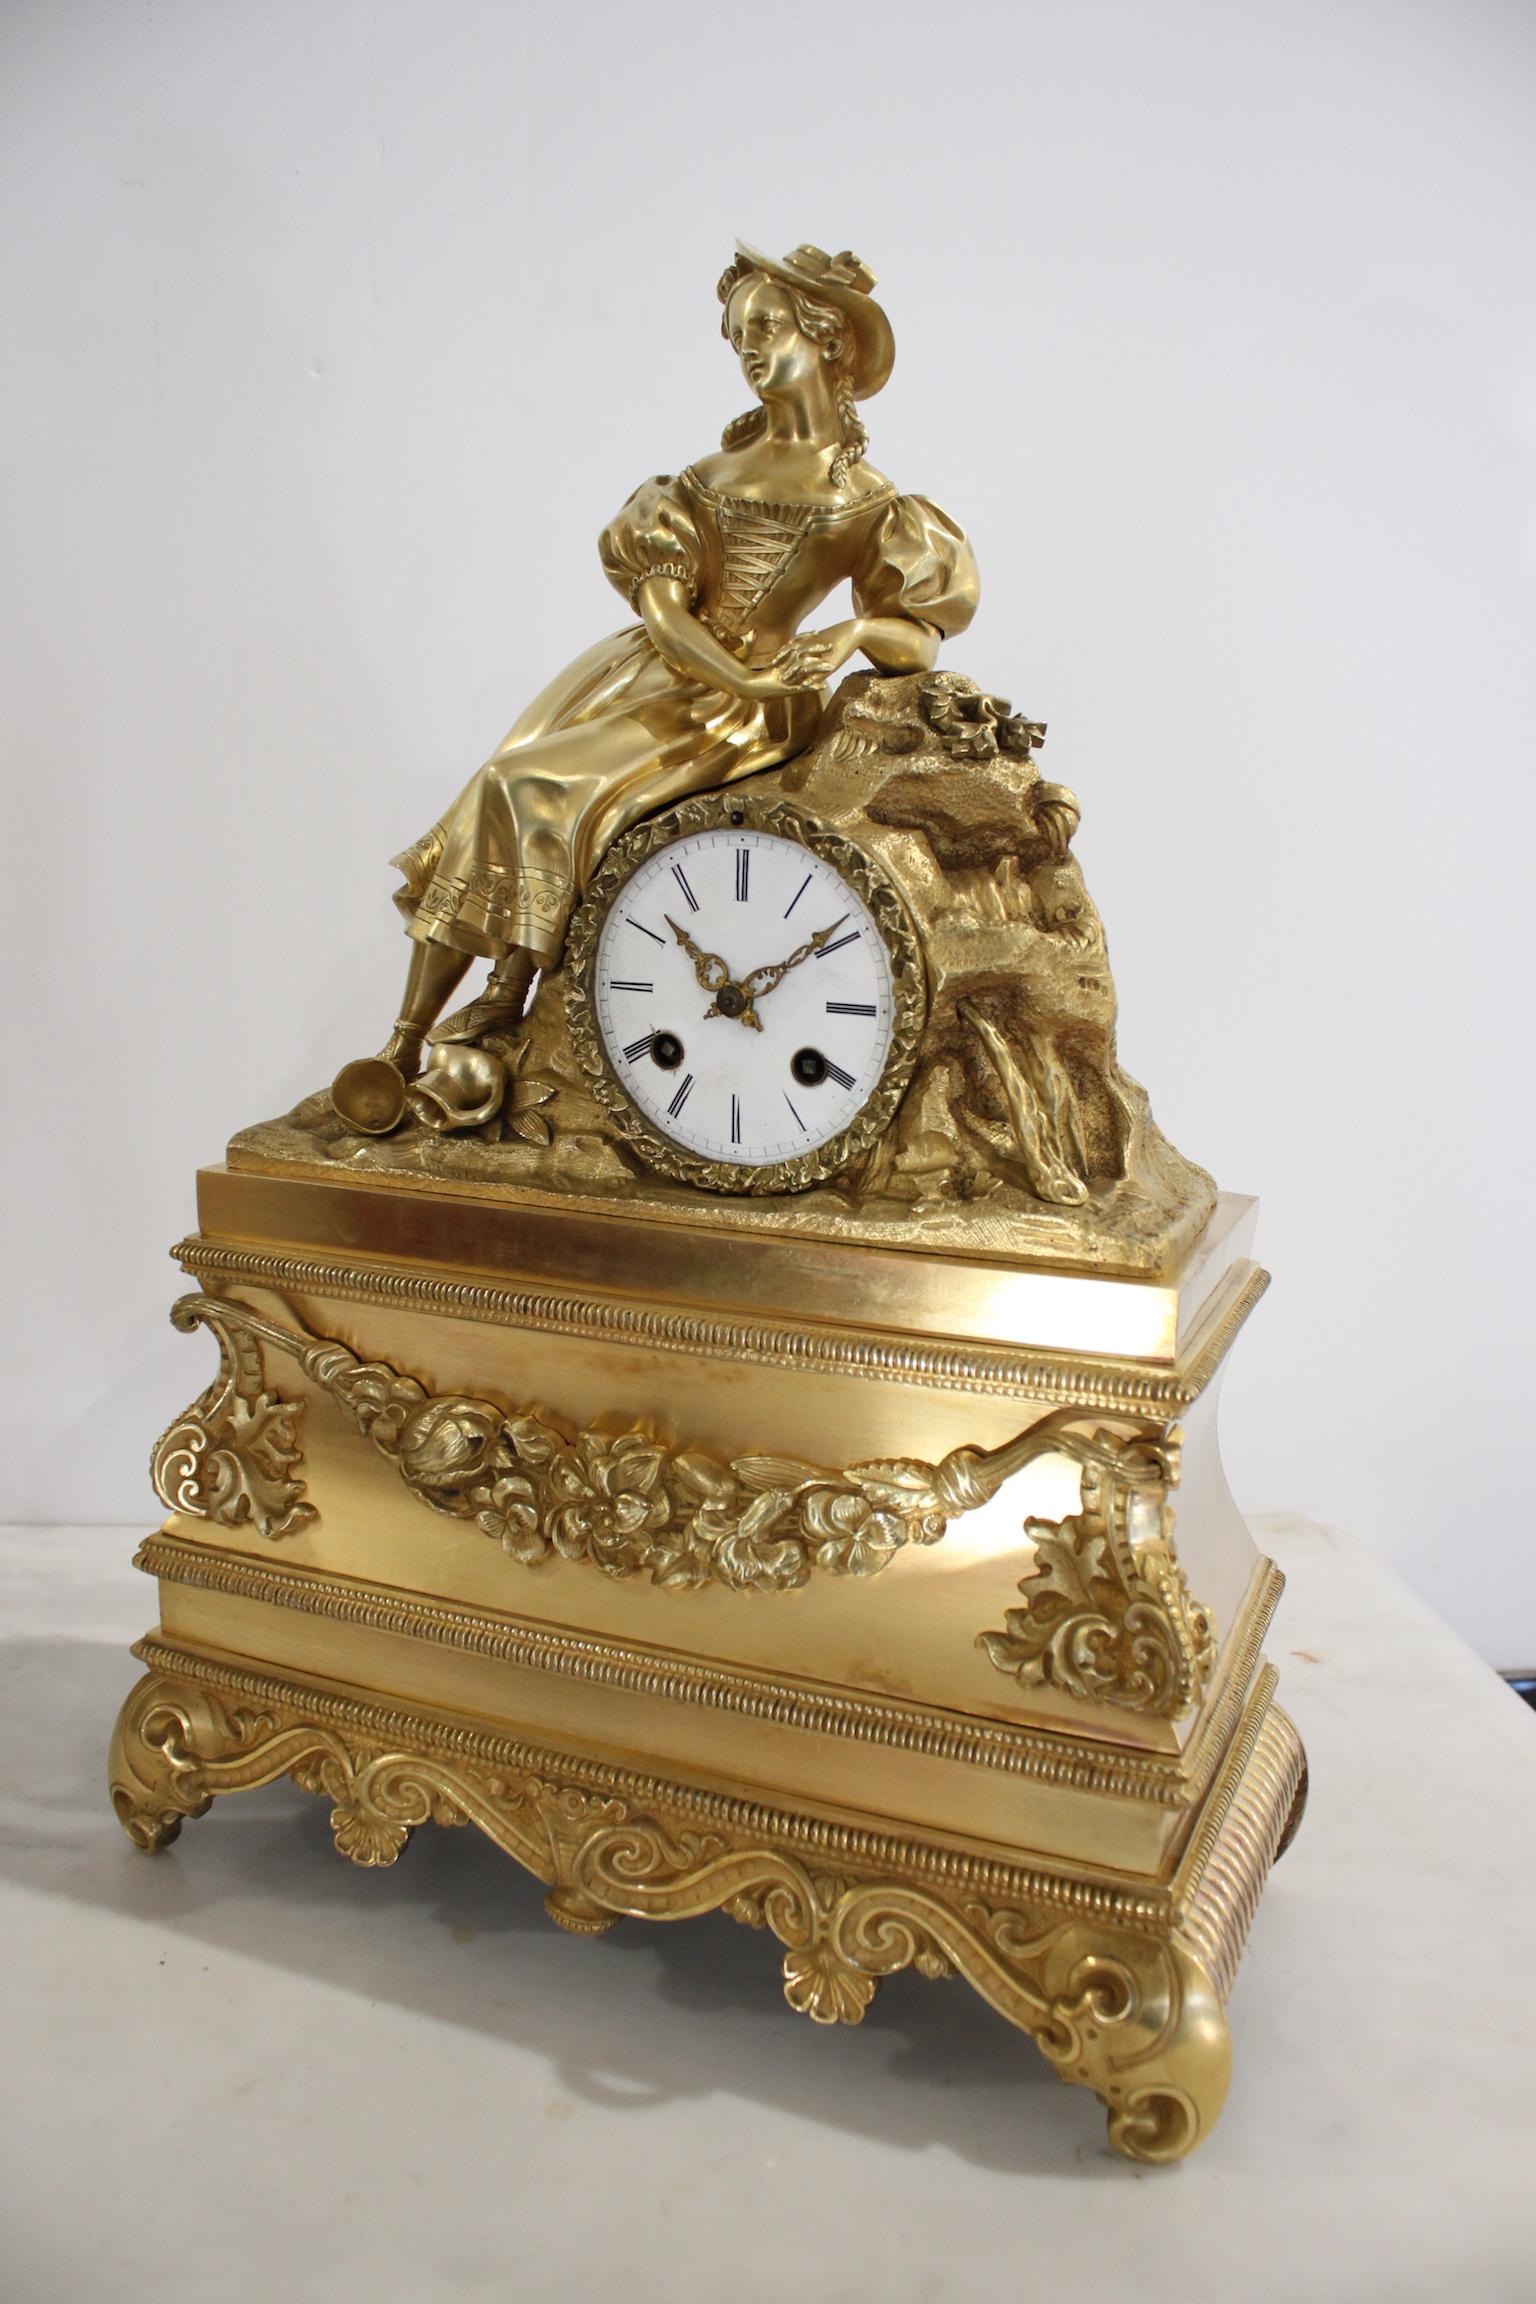 19th century gilt bronze clock representing a woman with reversed jugs. In working order. 
Dimensions: width 32cm, height 44cm, depth 13cm.